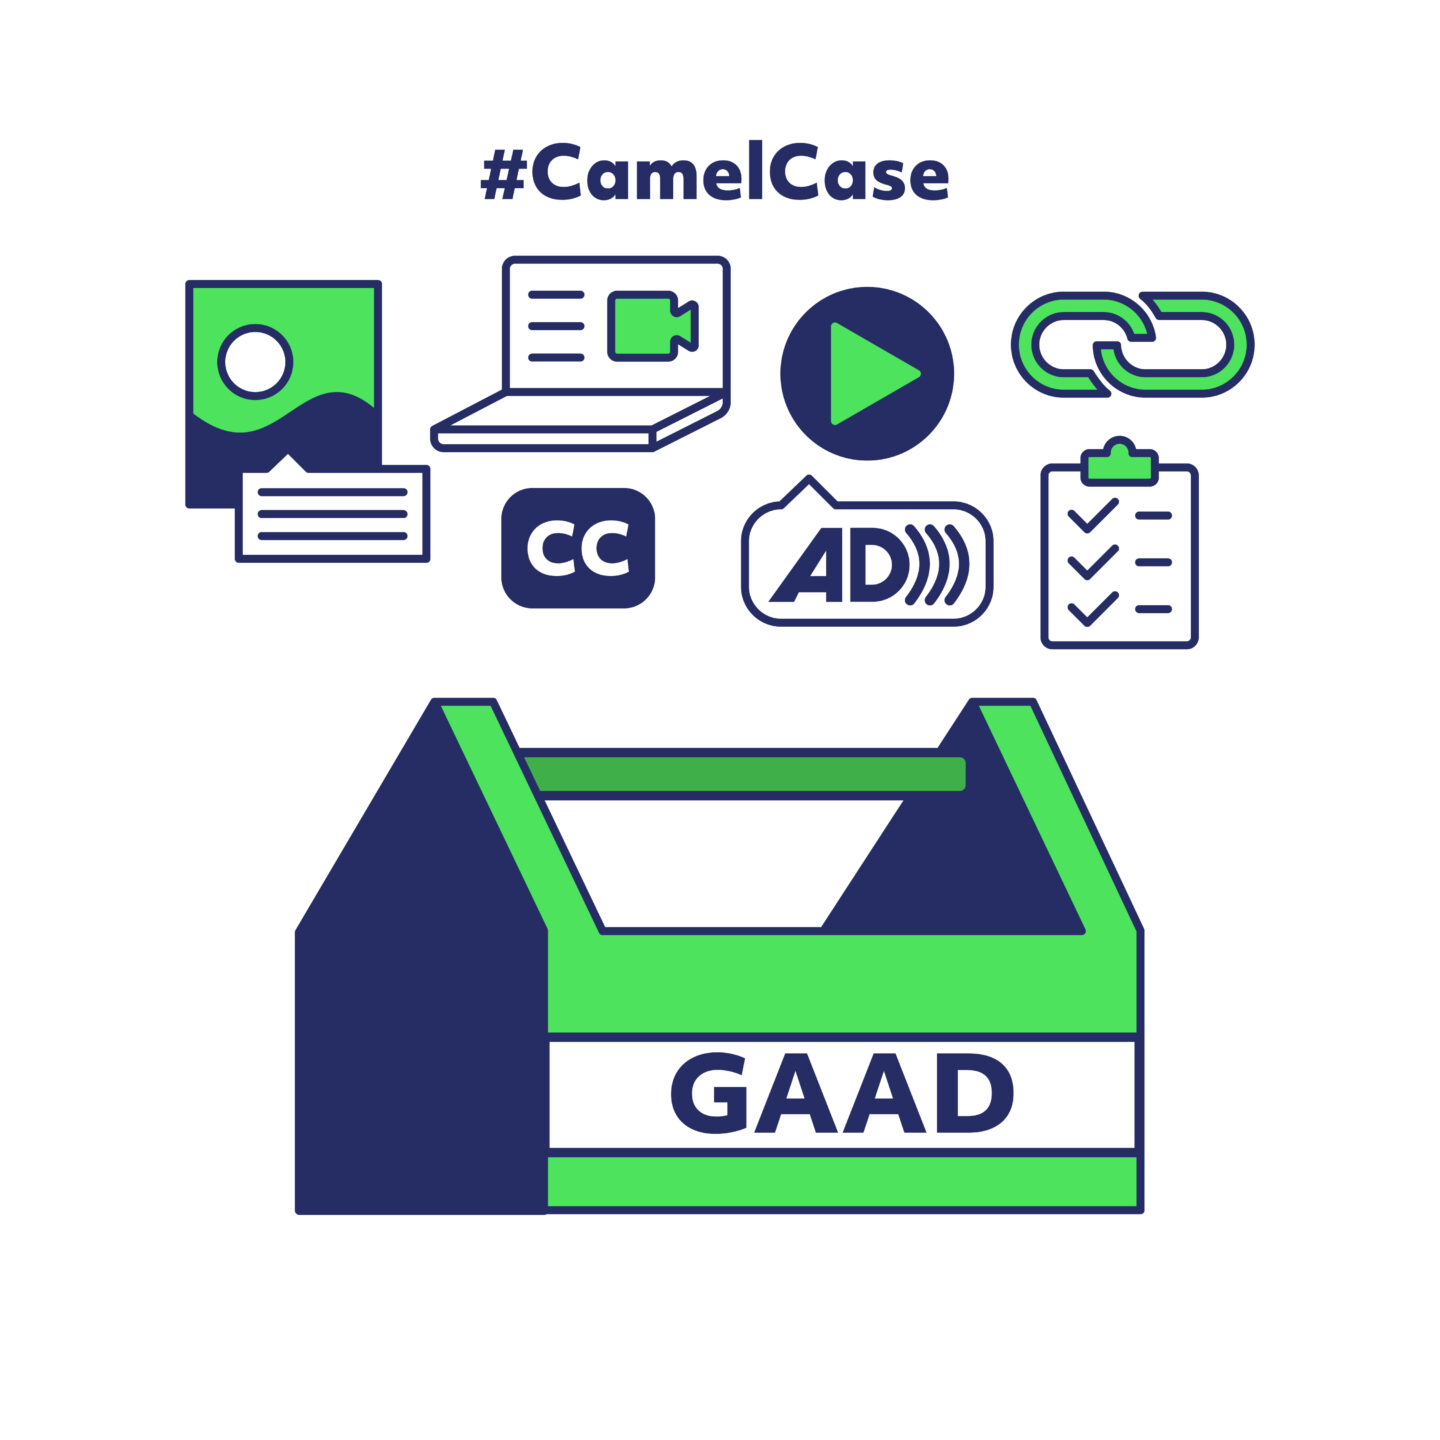 Icons in navy blue and neon green color palette: image alternative text, zoom call with transcript, closed captions, video with audio description, hyperlink, #CamelCase, and checklist with GAAD toolbox at the bottom.